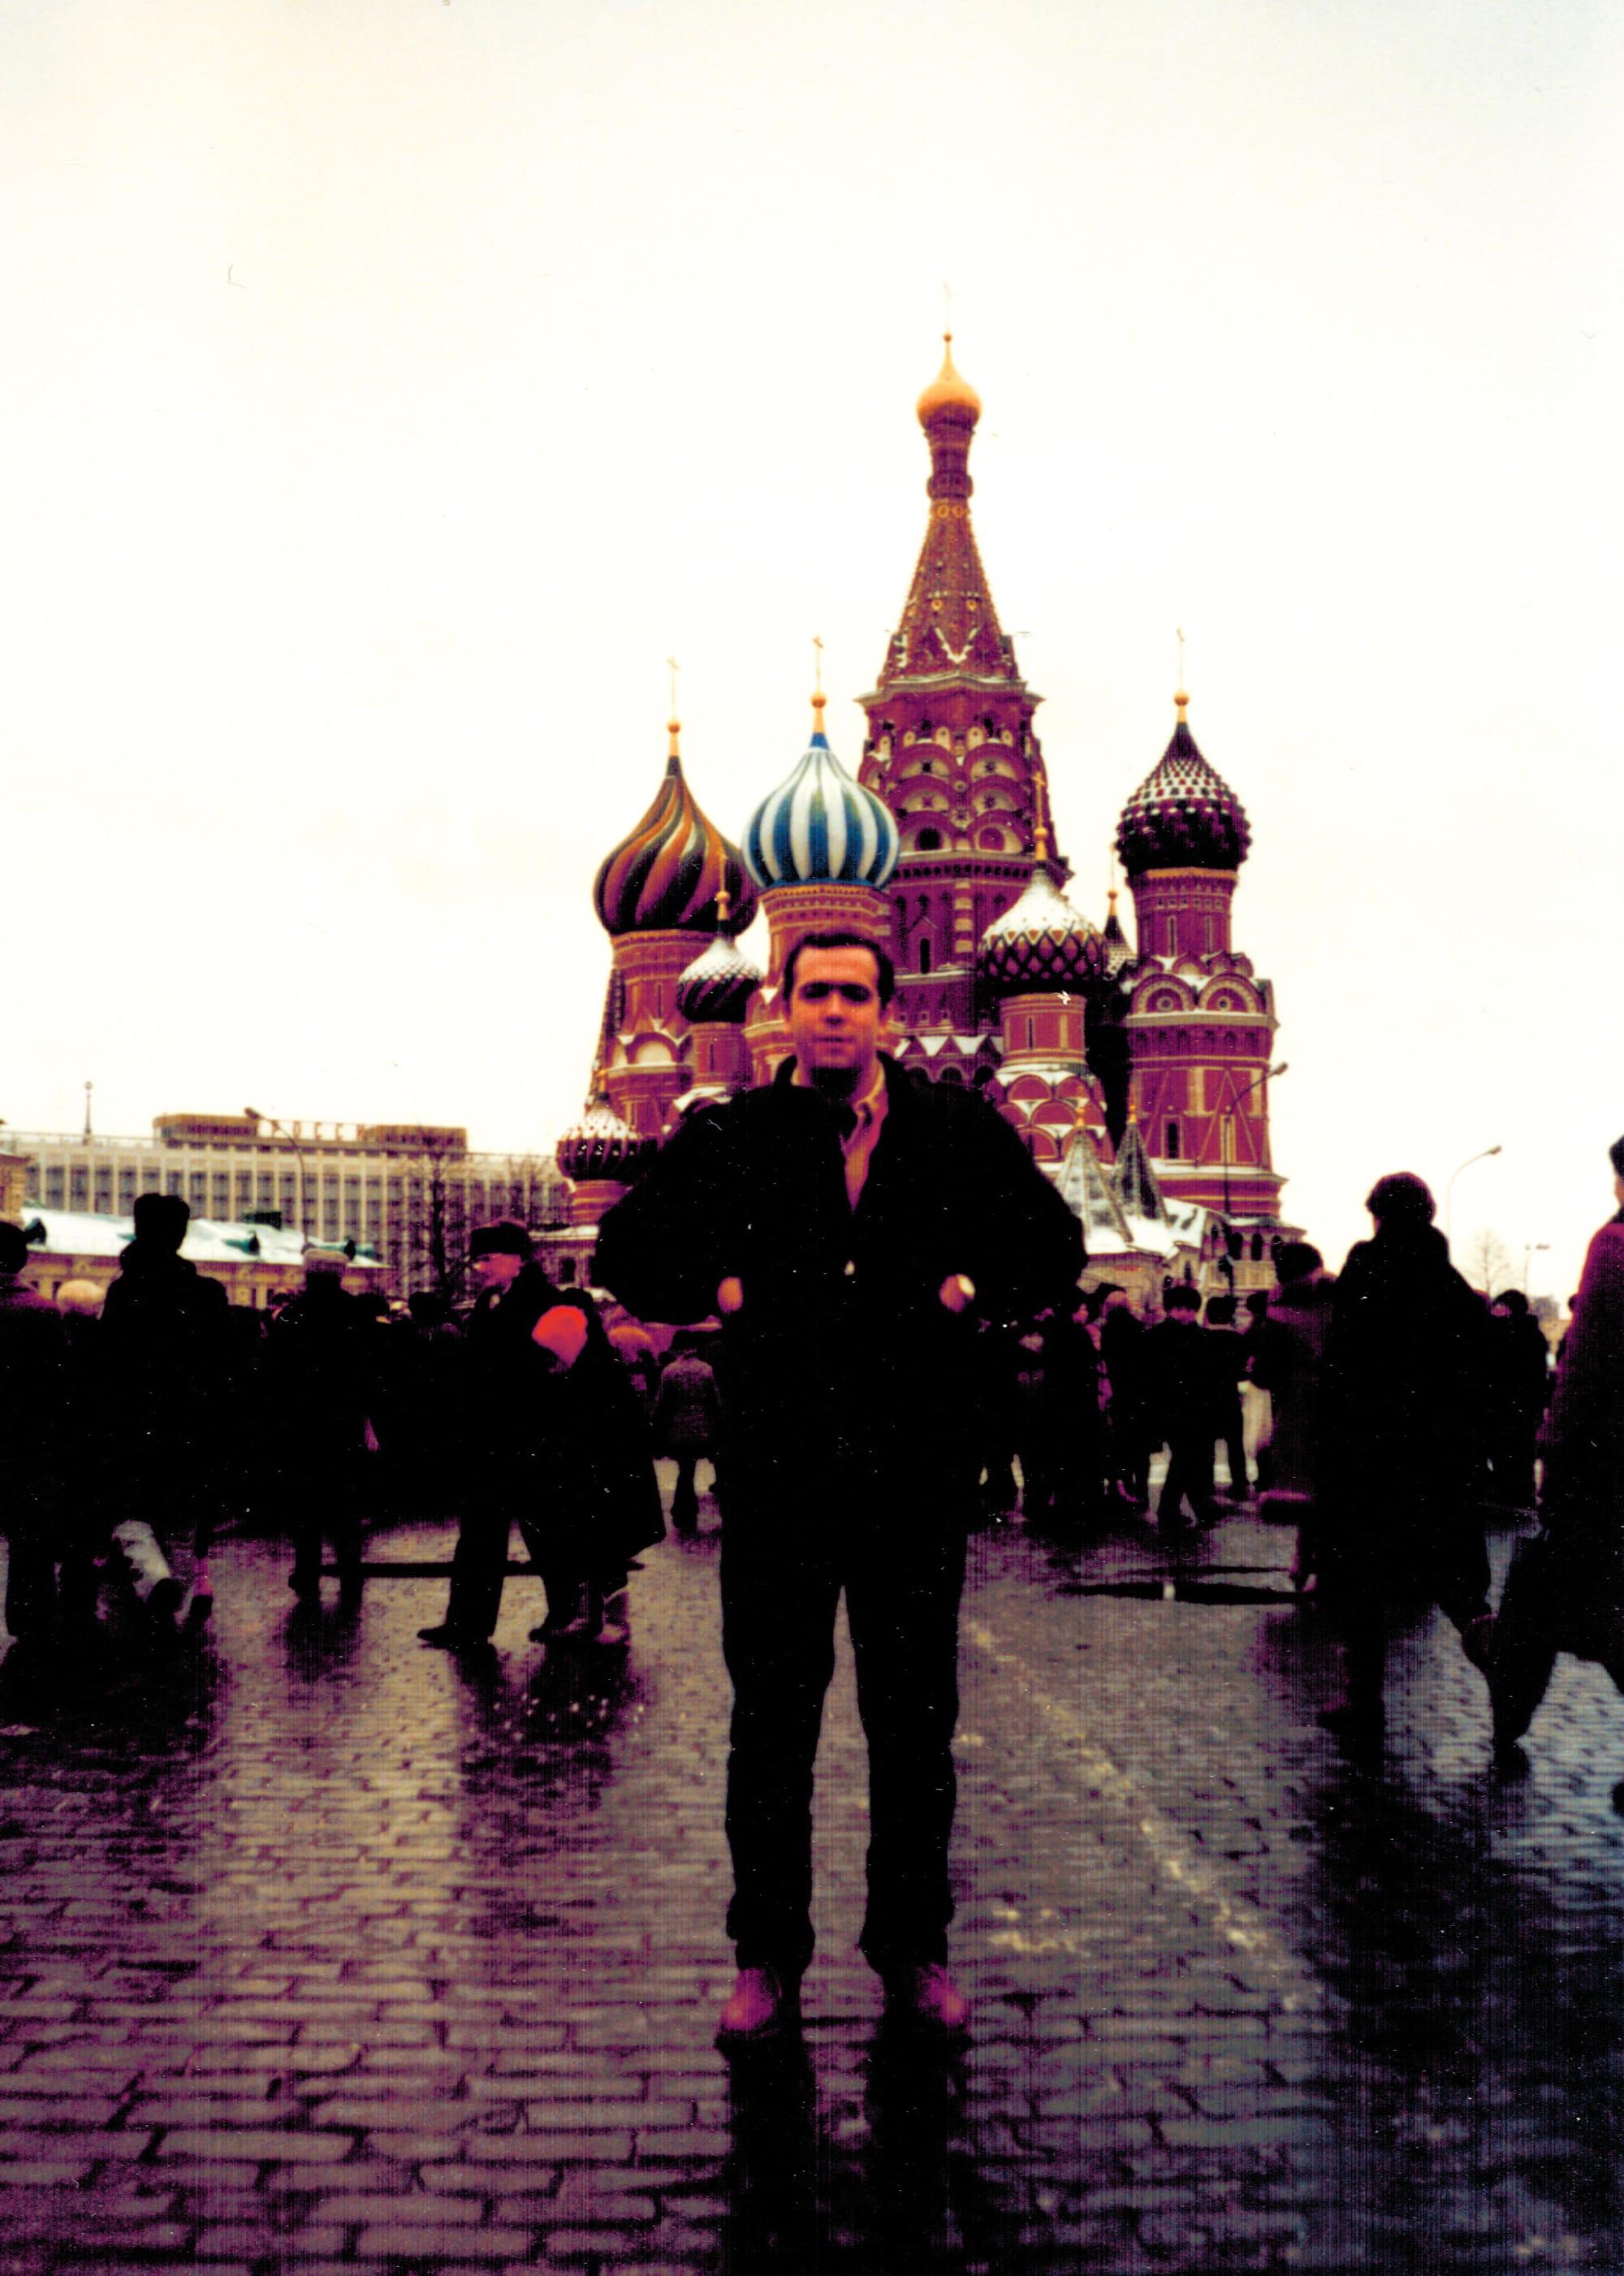 A young man standing in front of an onion-domed cathedral (St. Basil’s Cathedral, Moscow); a crowd is milling about